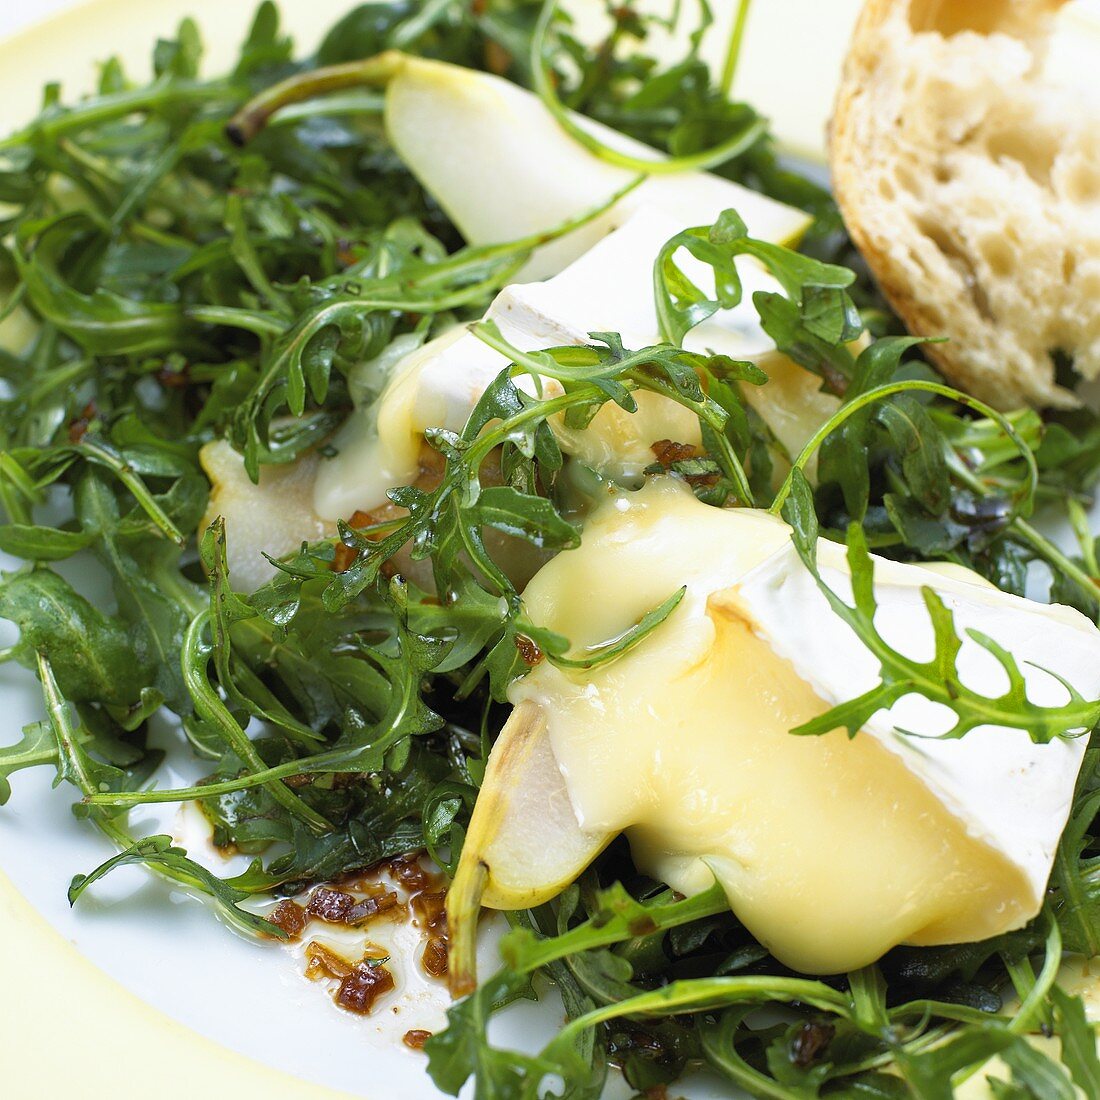 Rocket salad with pears and soft cheese